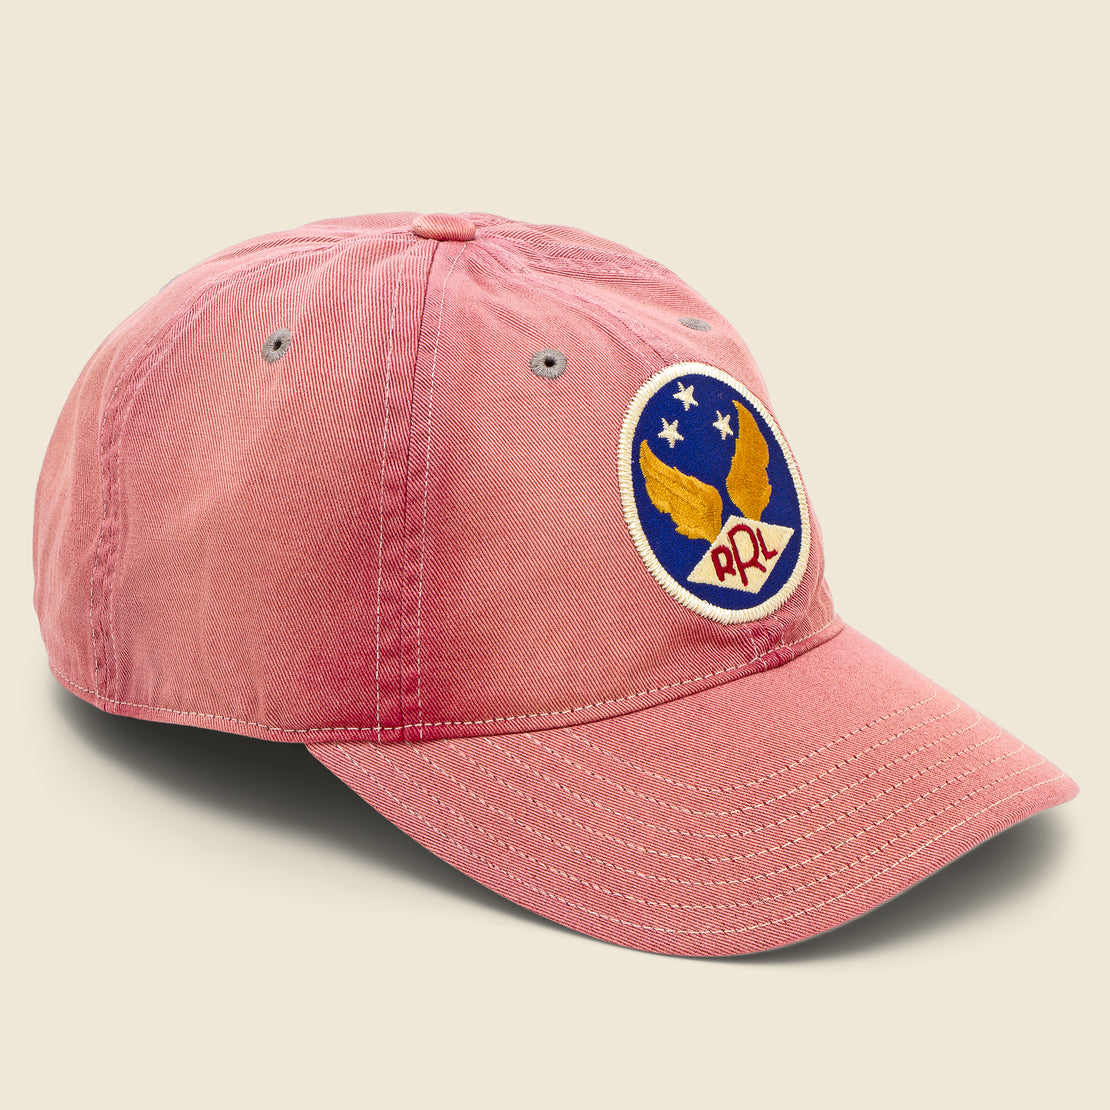 RRL Garment-Dyed Twill Ball Cap - Faded Red